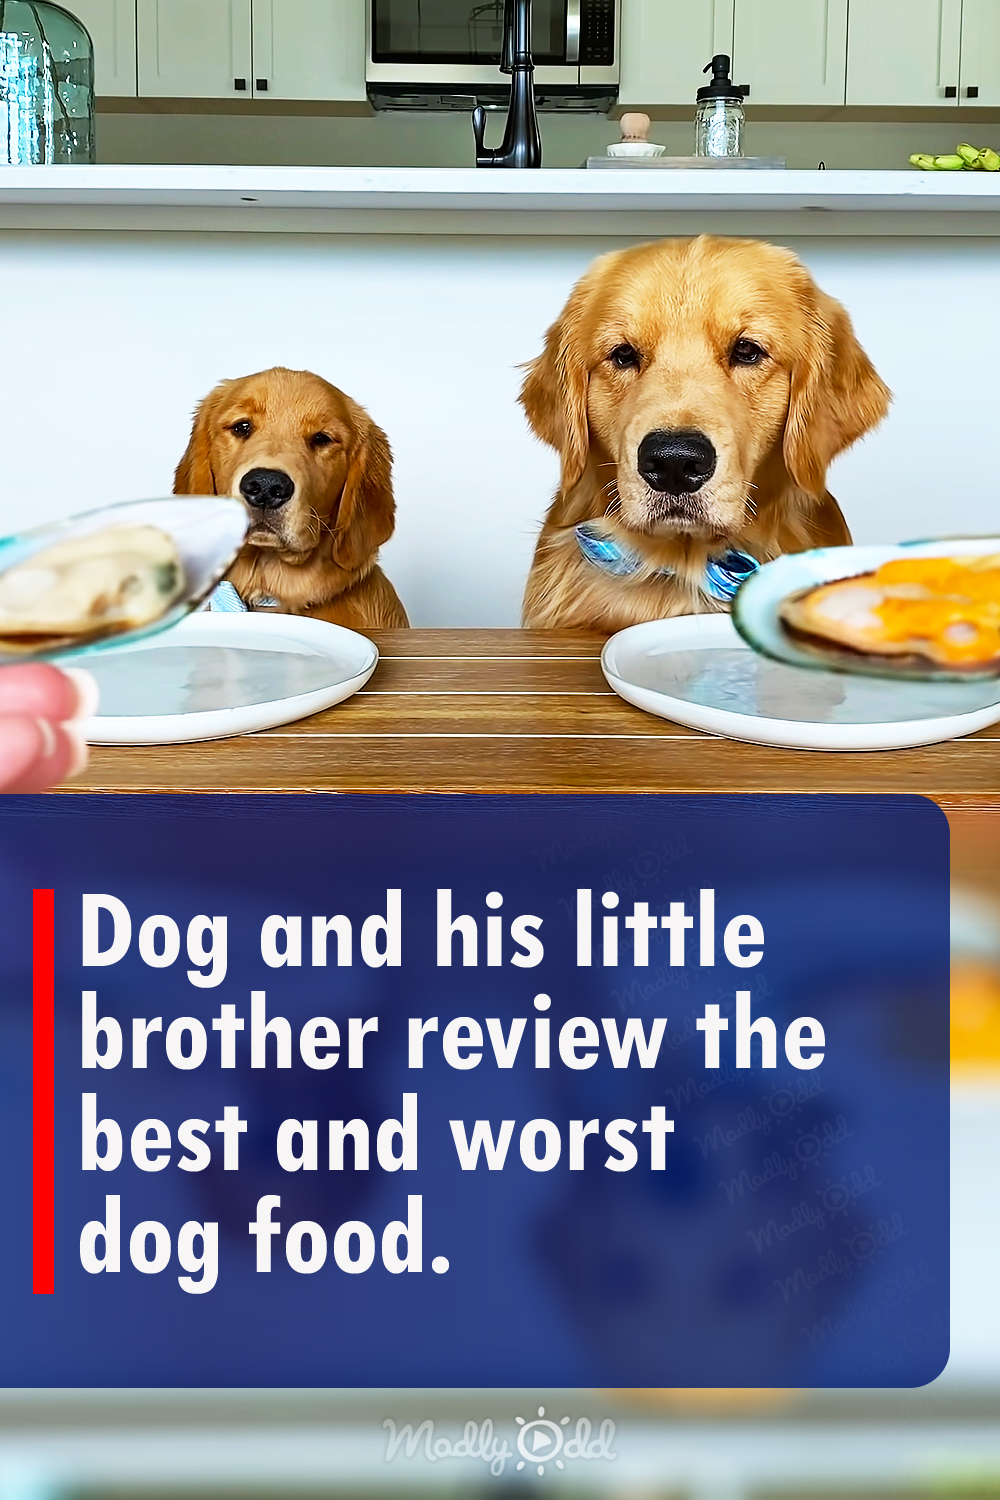 Dog and his little brother review the best and worst dog food.